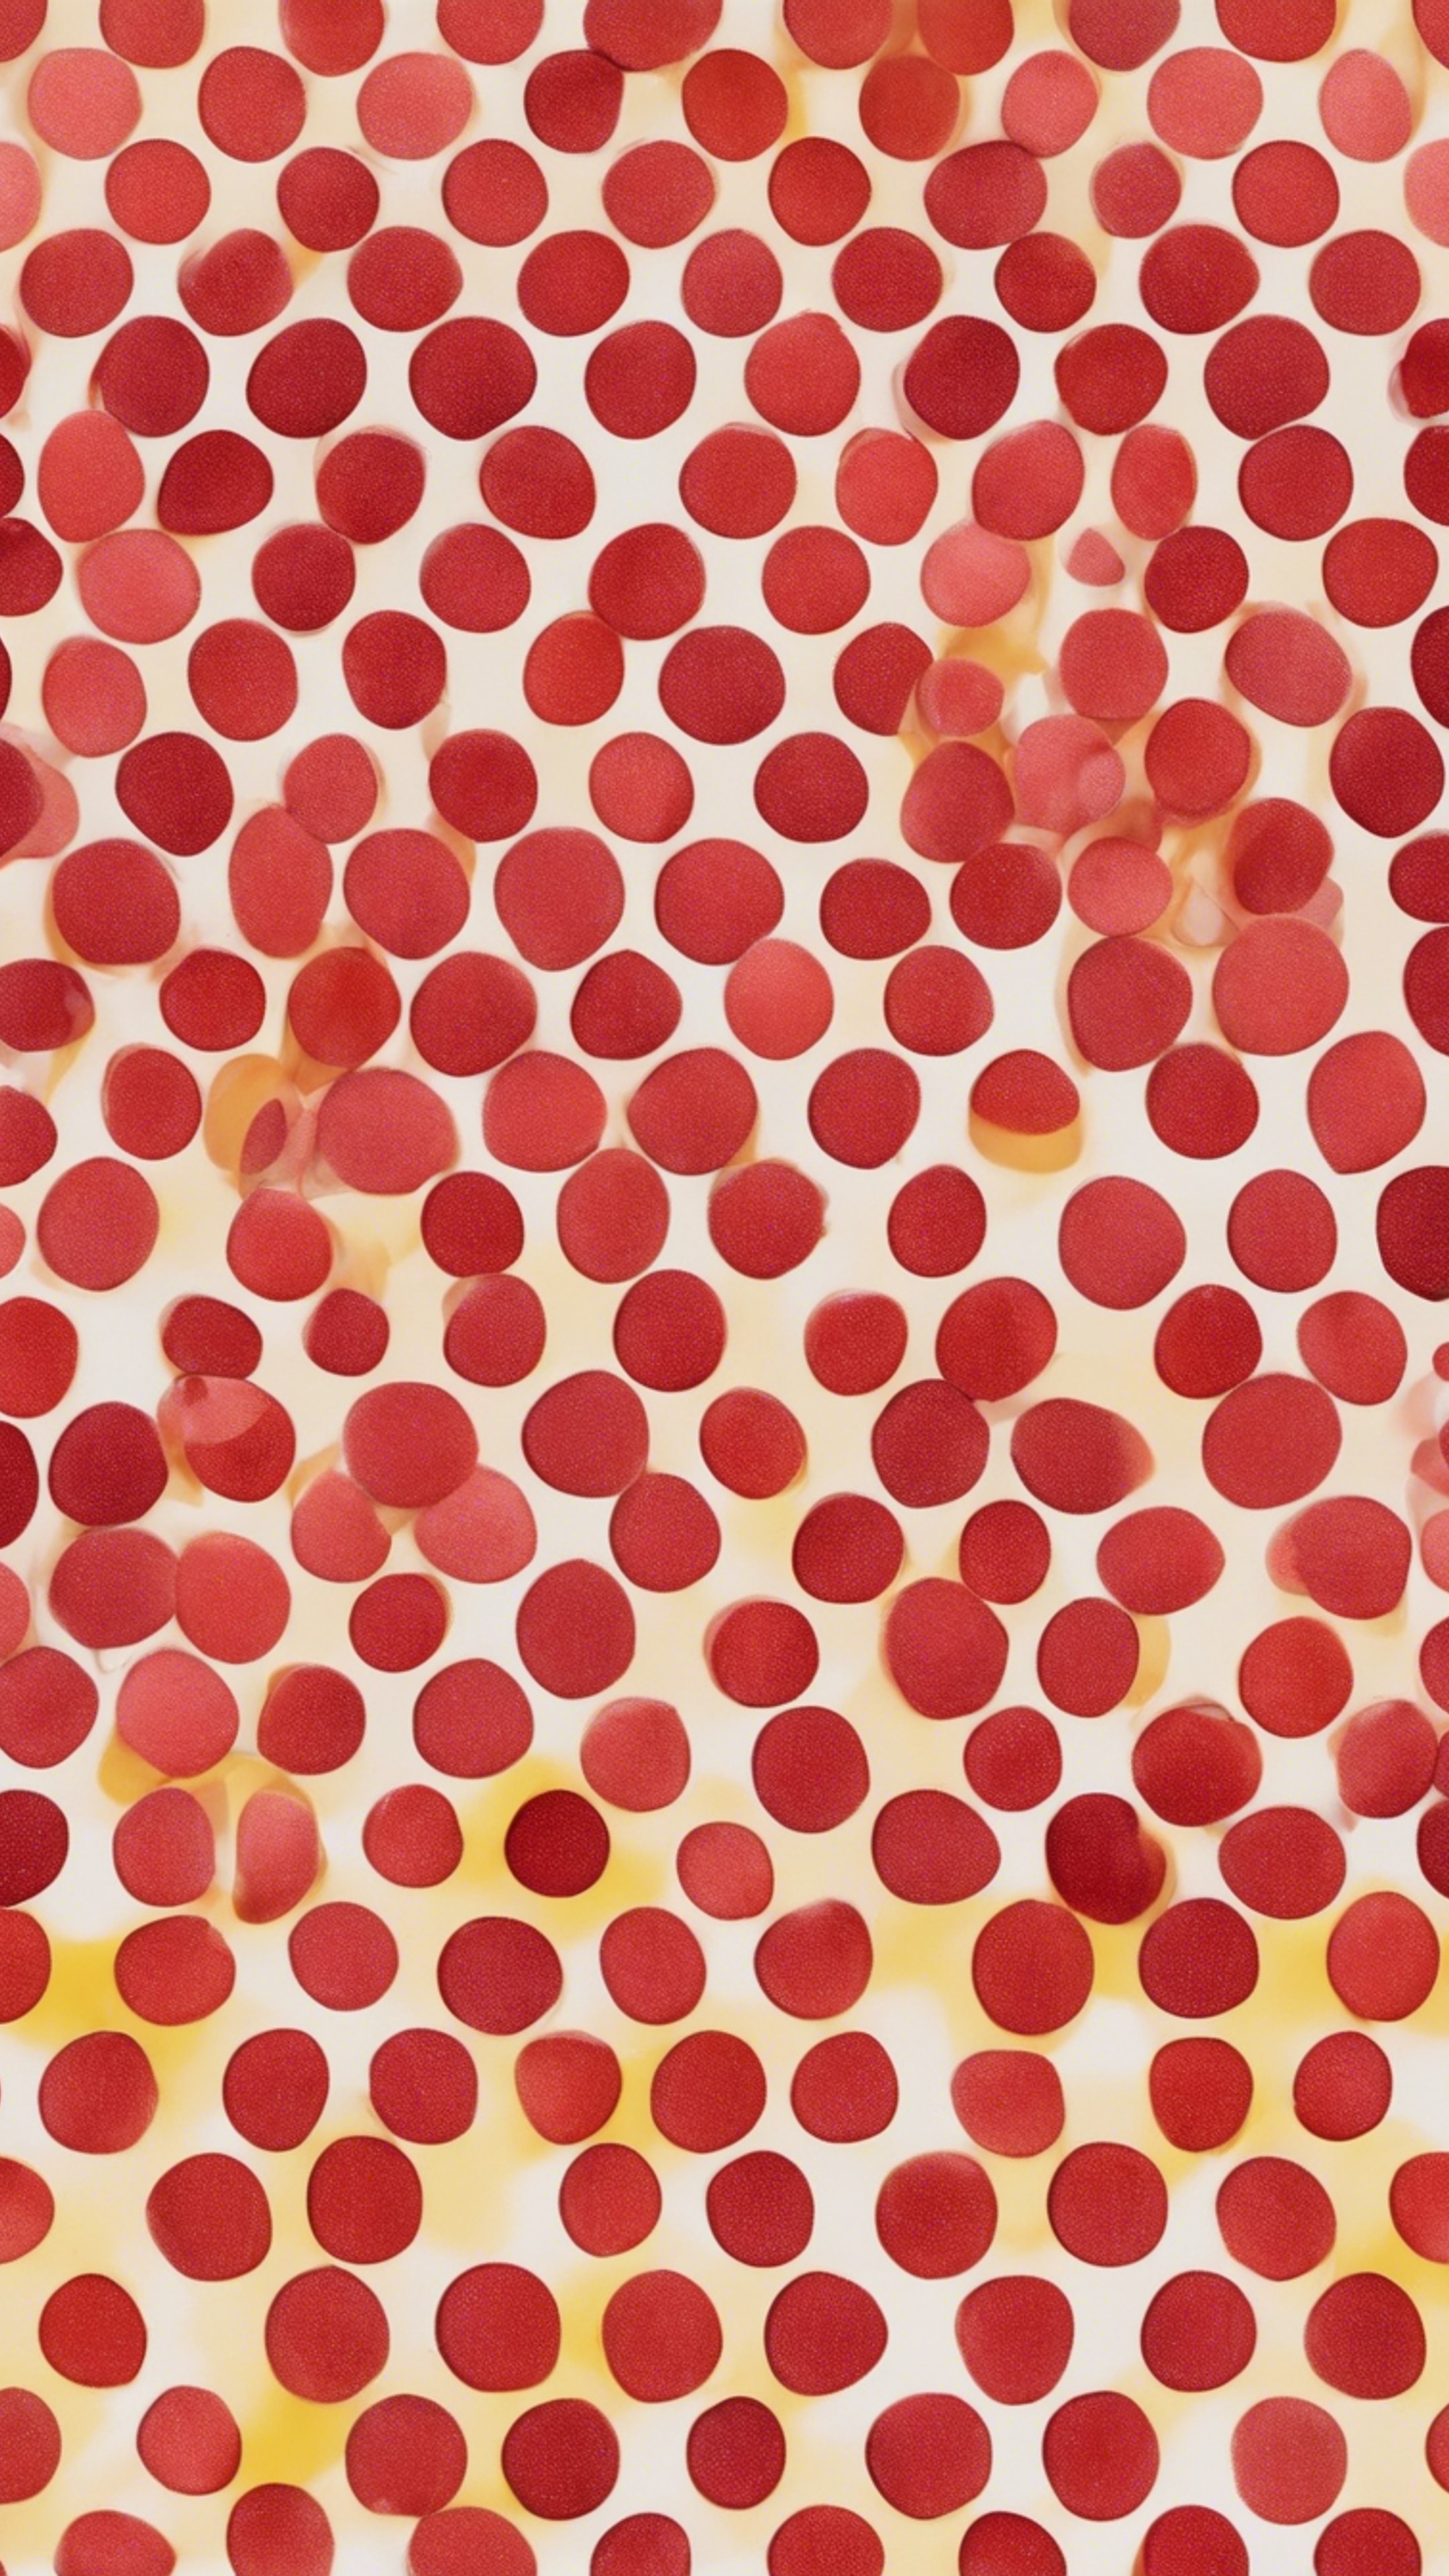 Red polka dots clashing beautifully with yellow ones, all over the seamless canvas.壁紙[6845ea3f5aaf42daa07d]